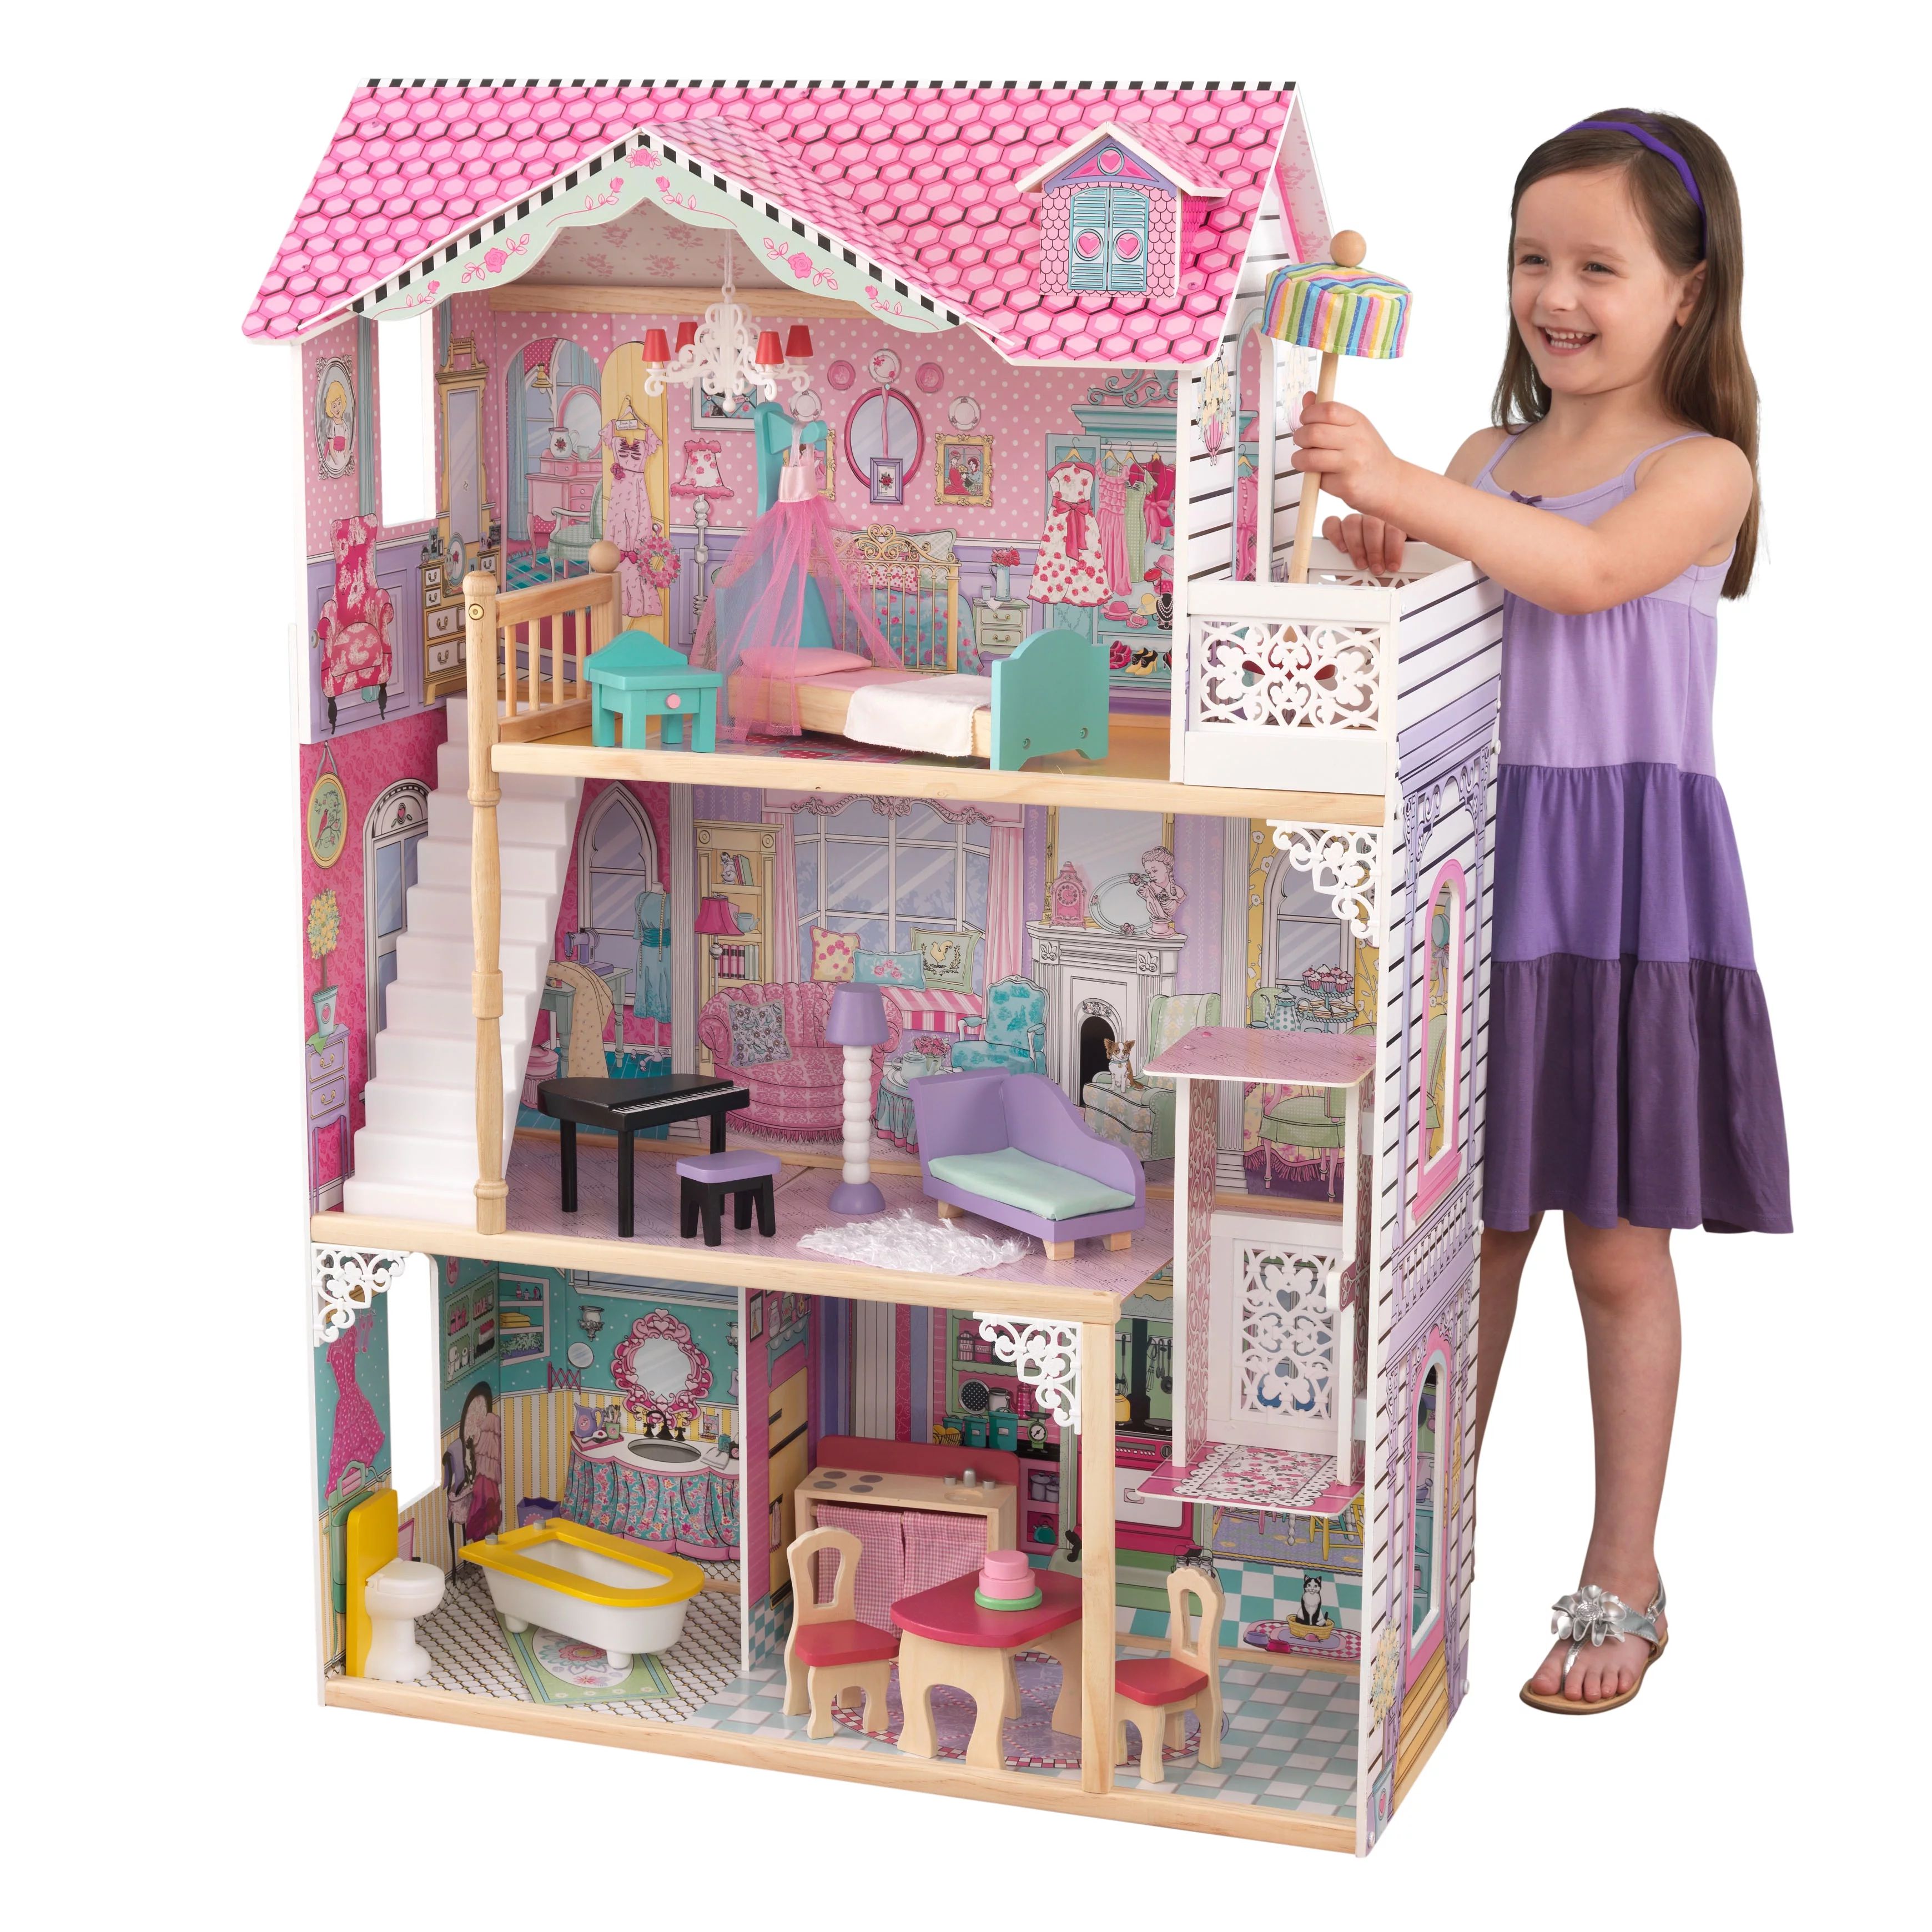 KidKraft Annabelle Dollhouse with 17 Accessories Included | Walmart (US)